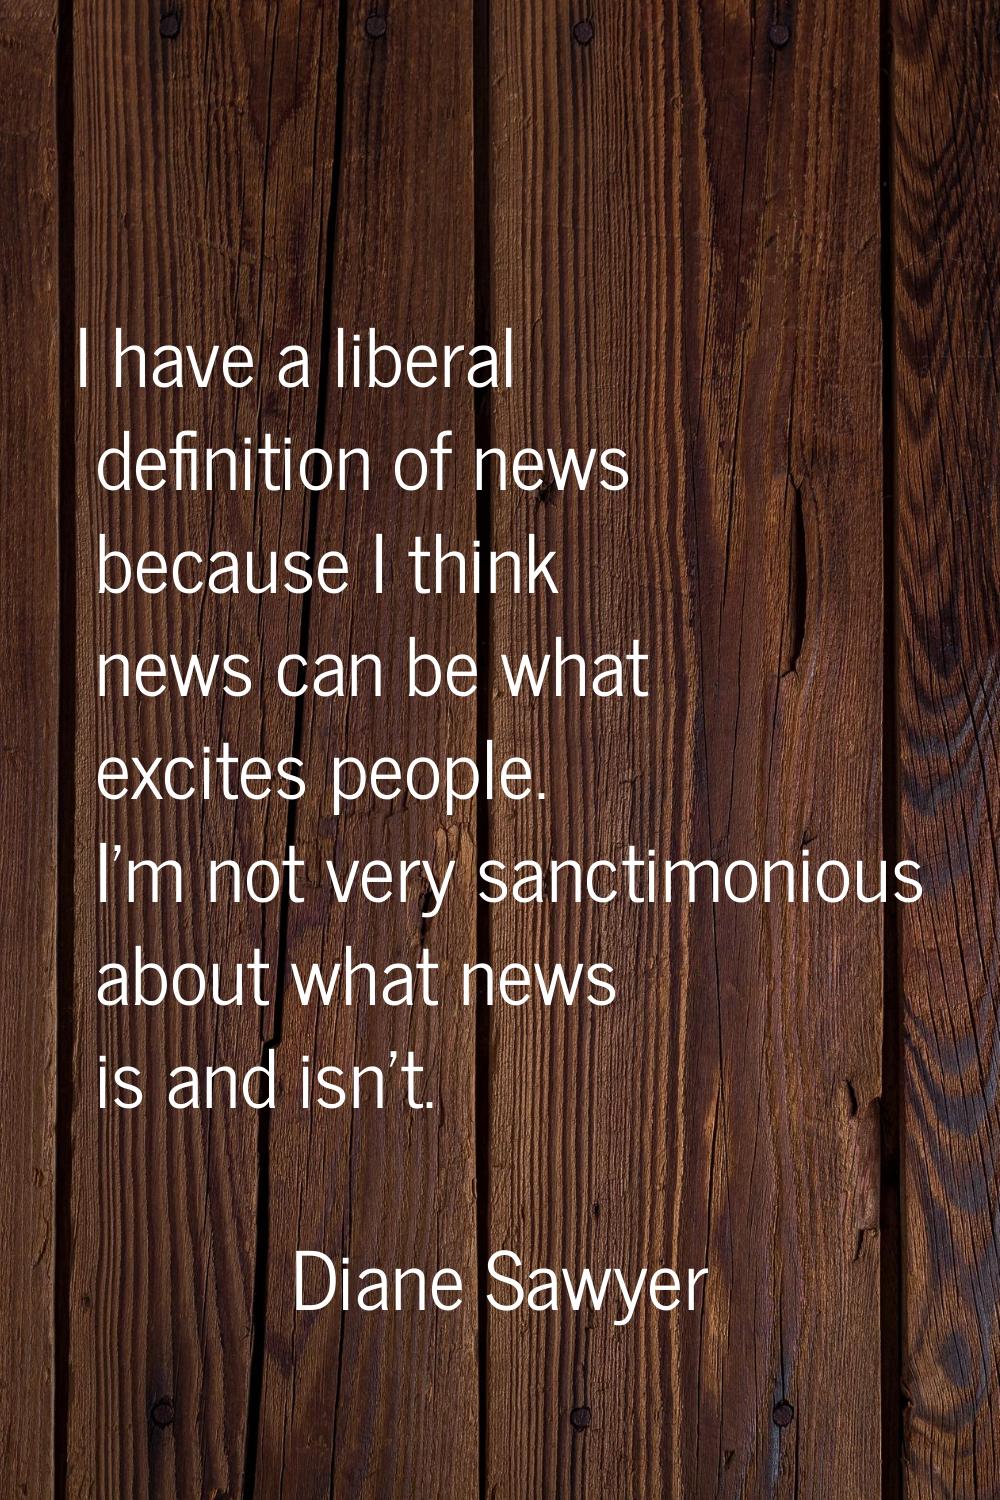 I have a liberal definition of news because I think news can be what excites people. I'm not very s